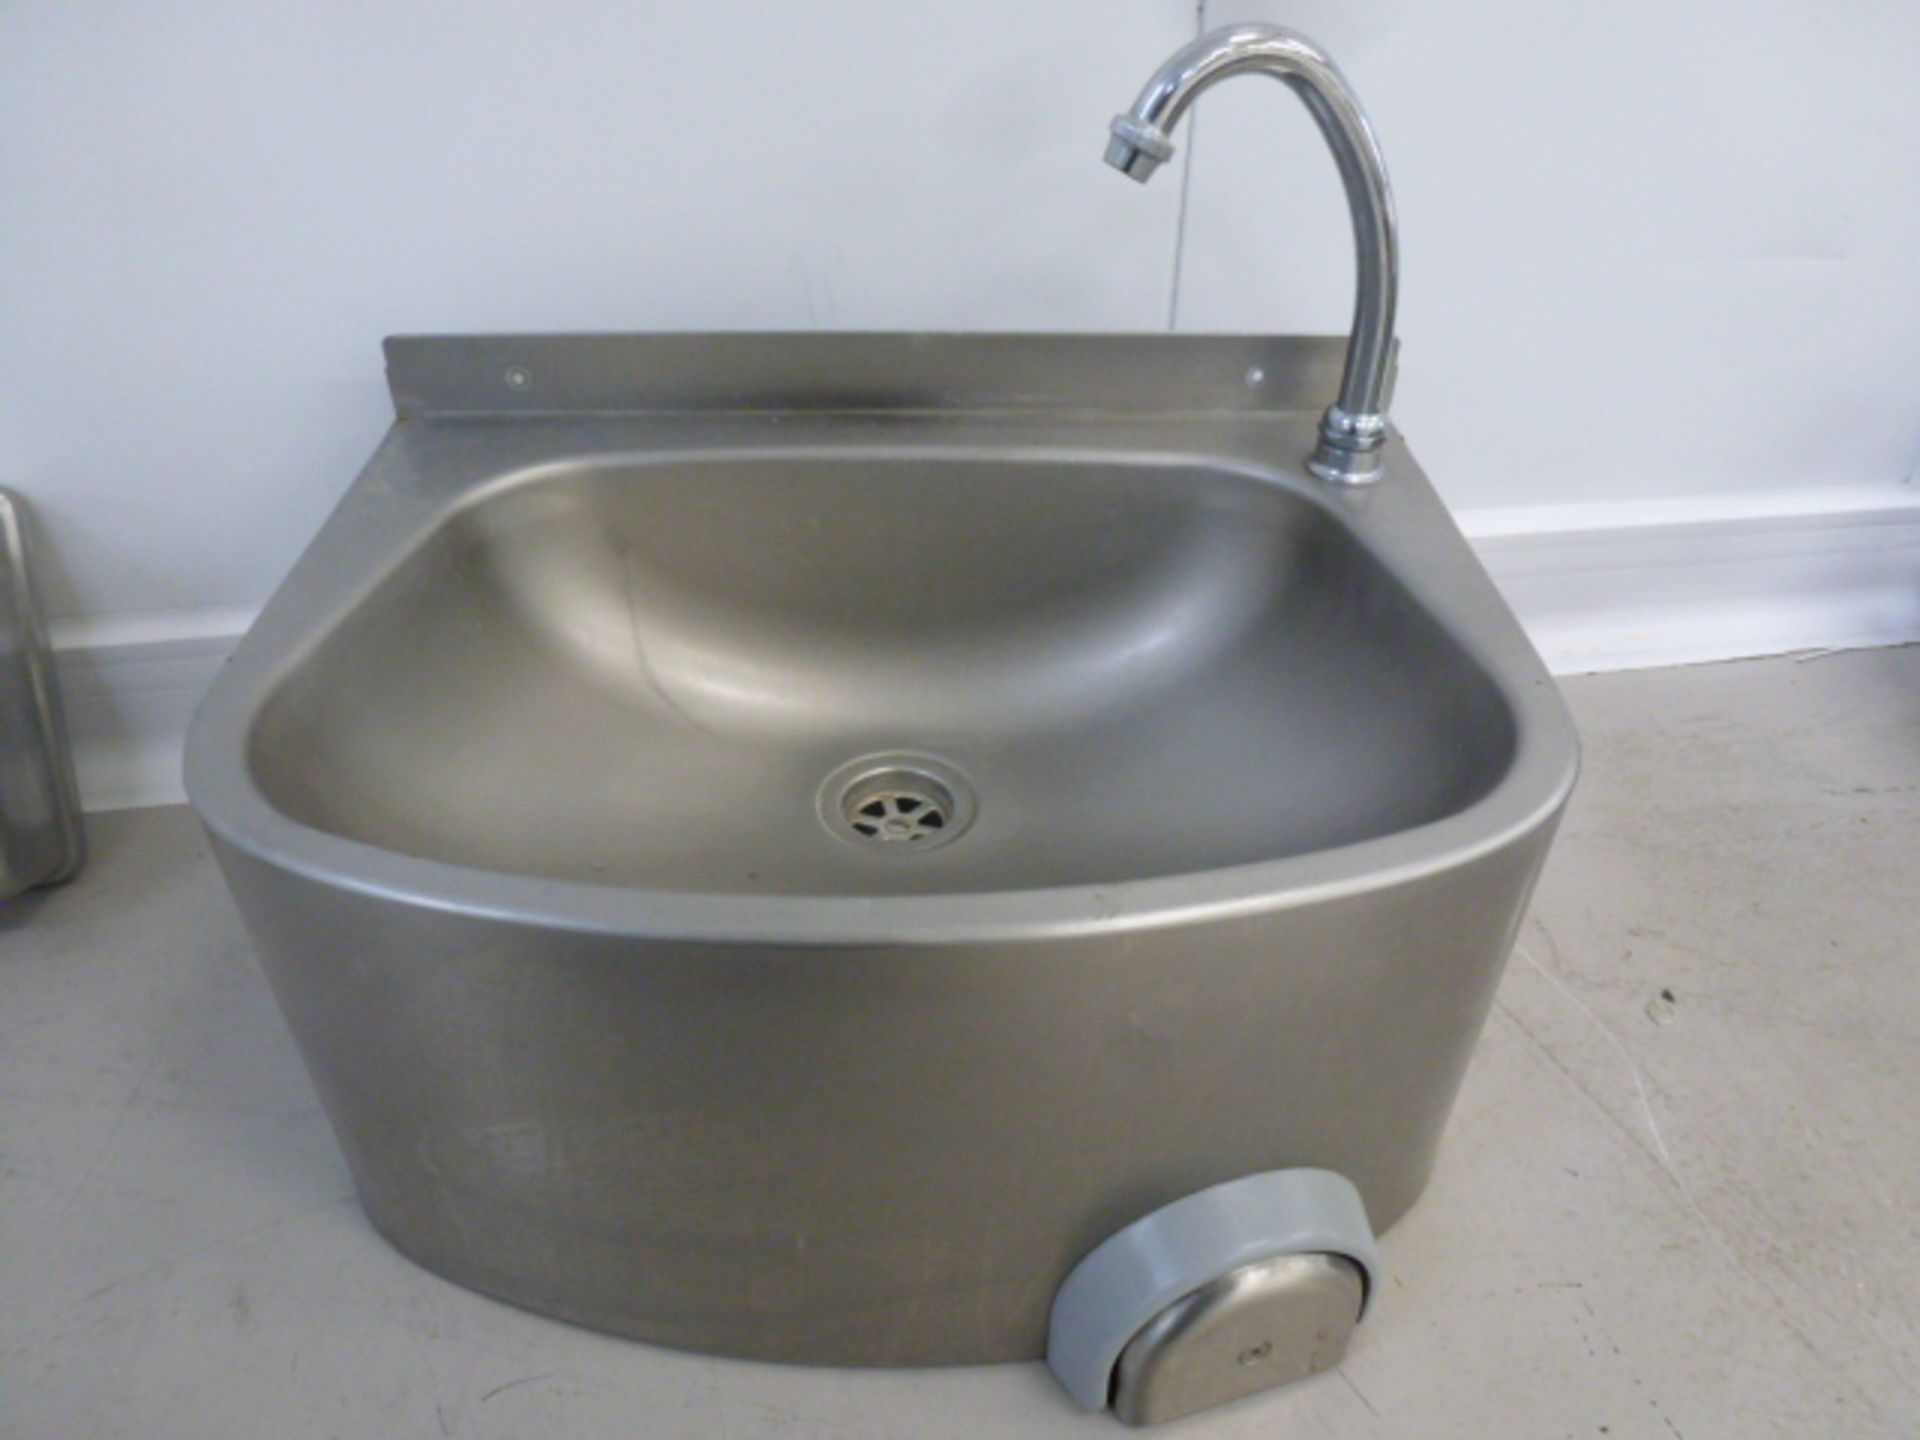 Stainless Steel Knee Operated Hand Wash Basin with Soap Dispenser. - Image 2 of 3